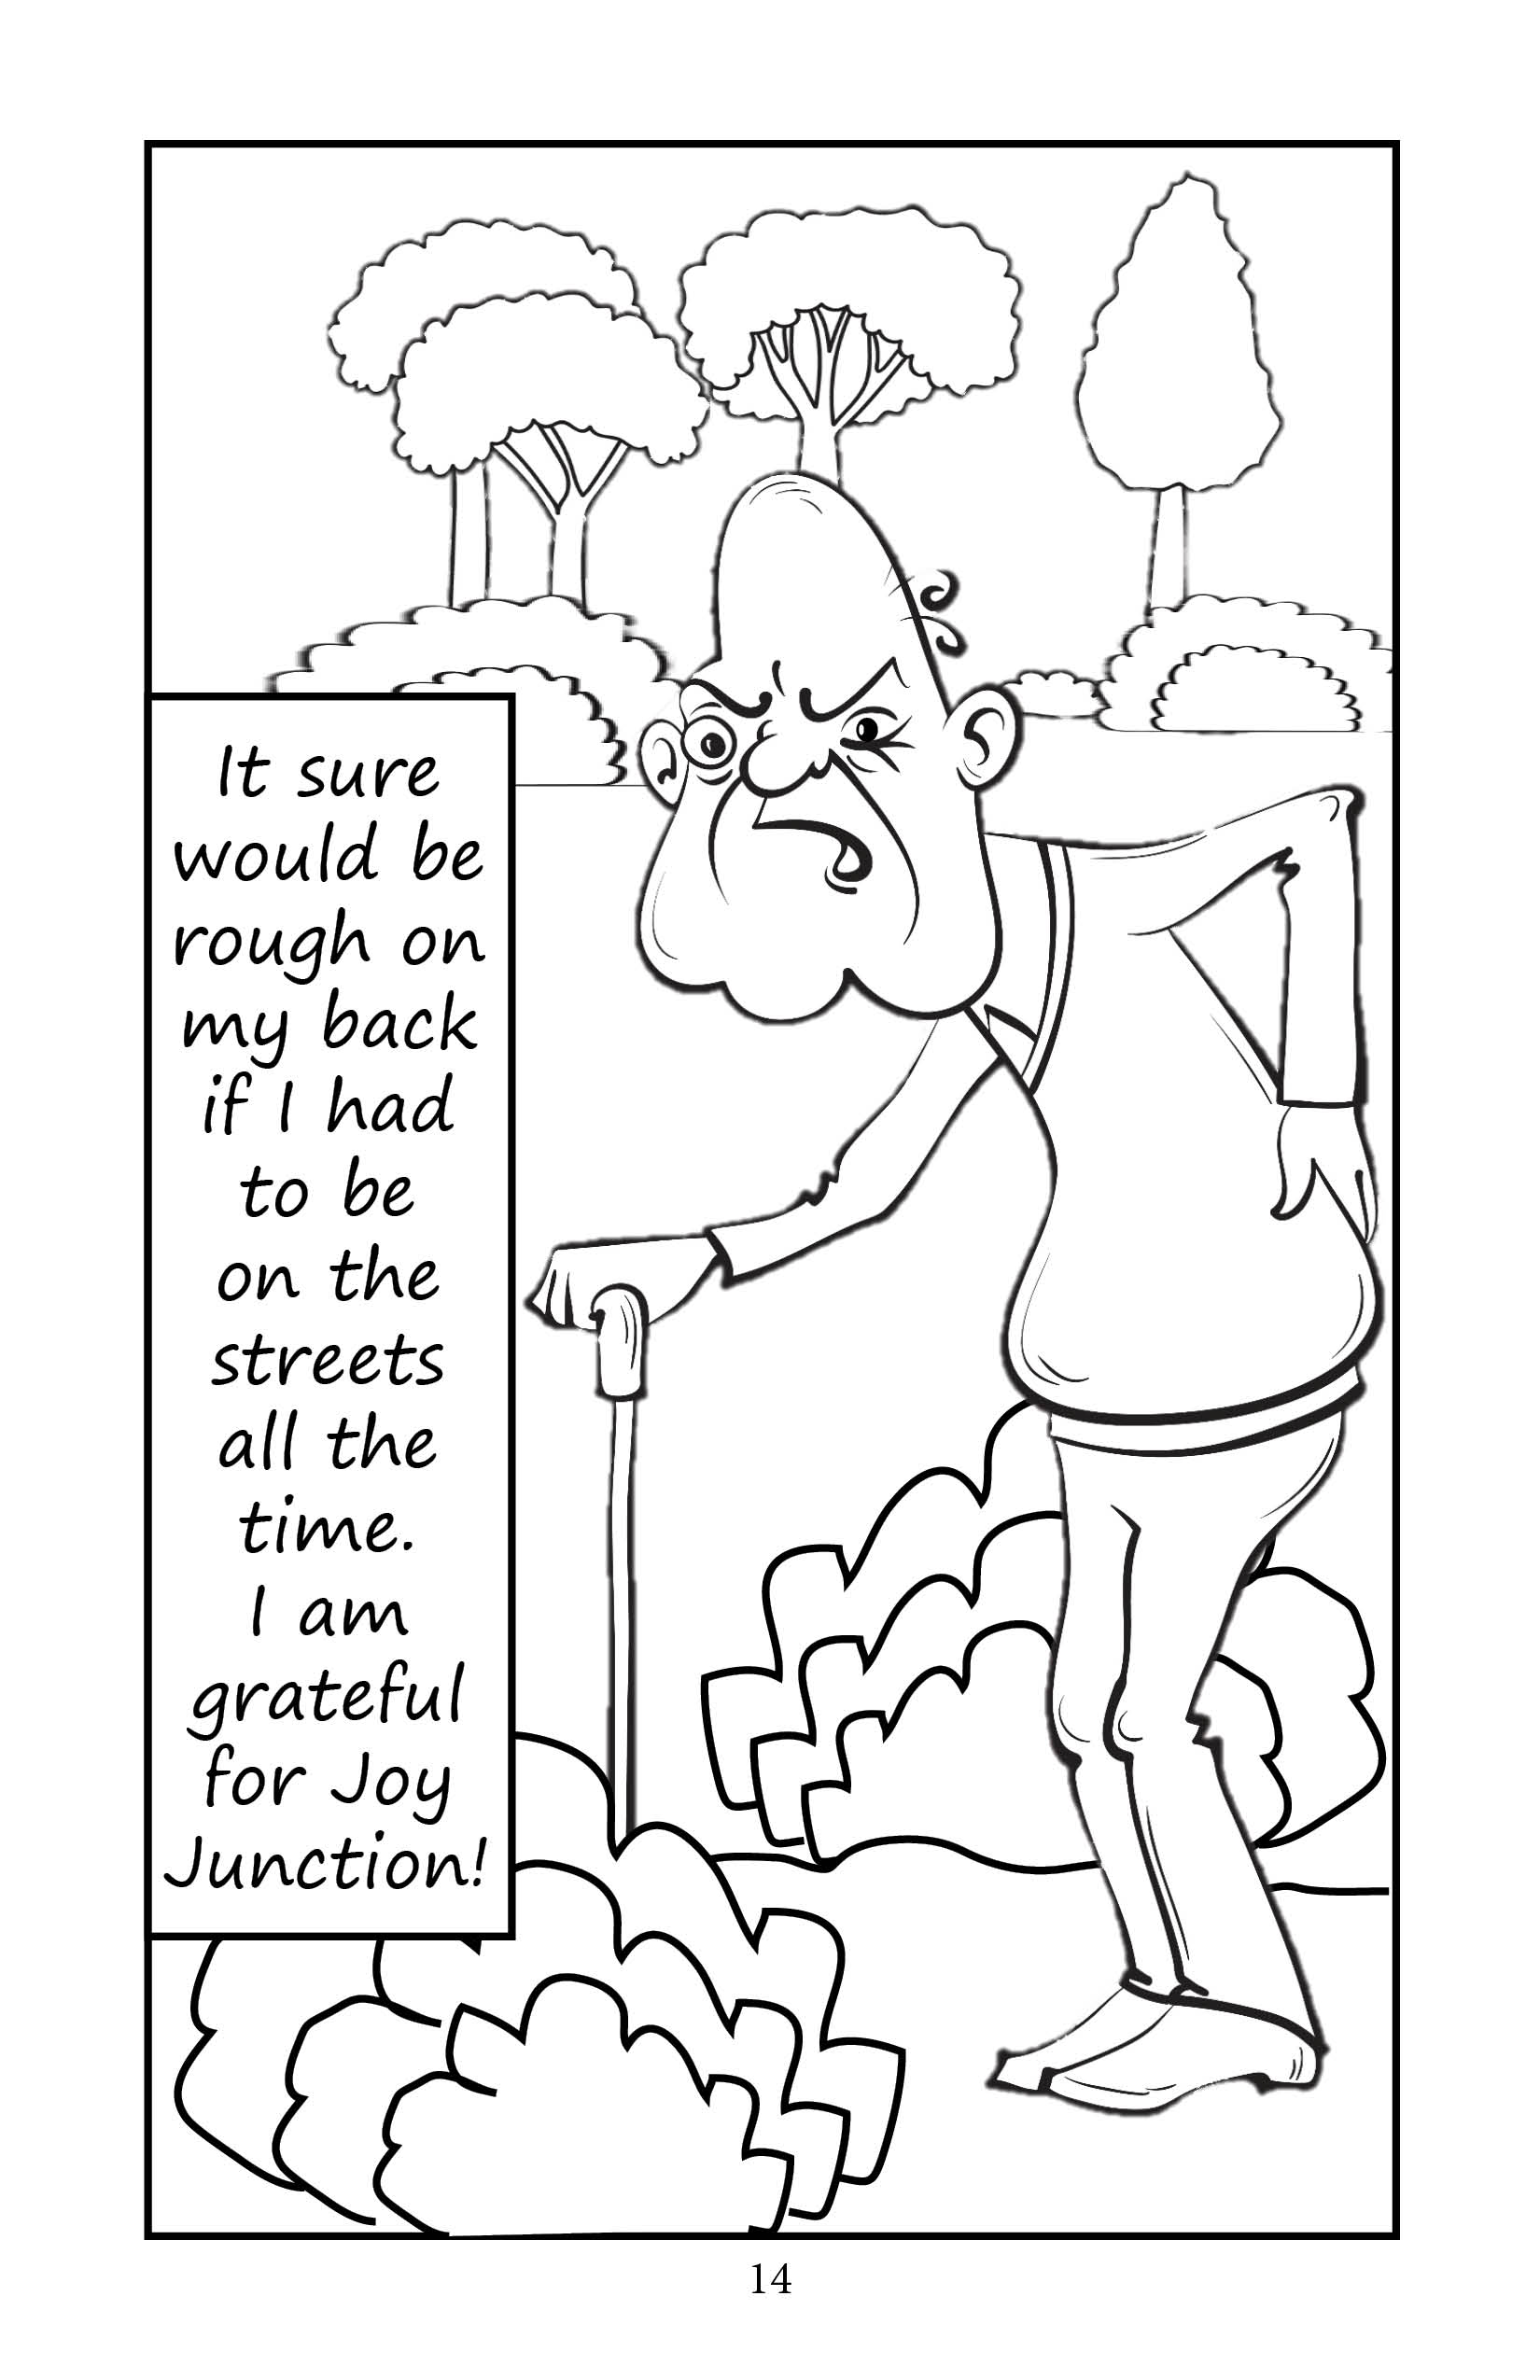 Joy Junction Coloring Book Page 14